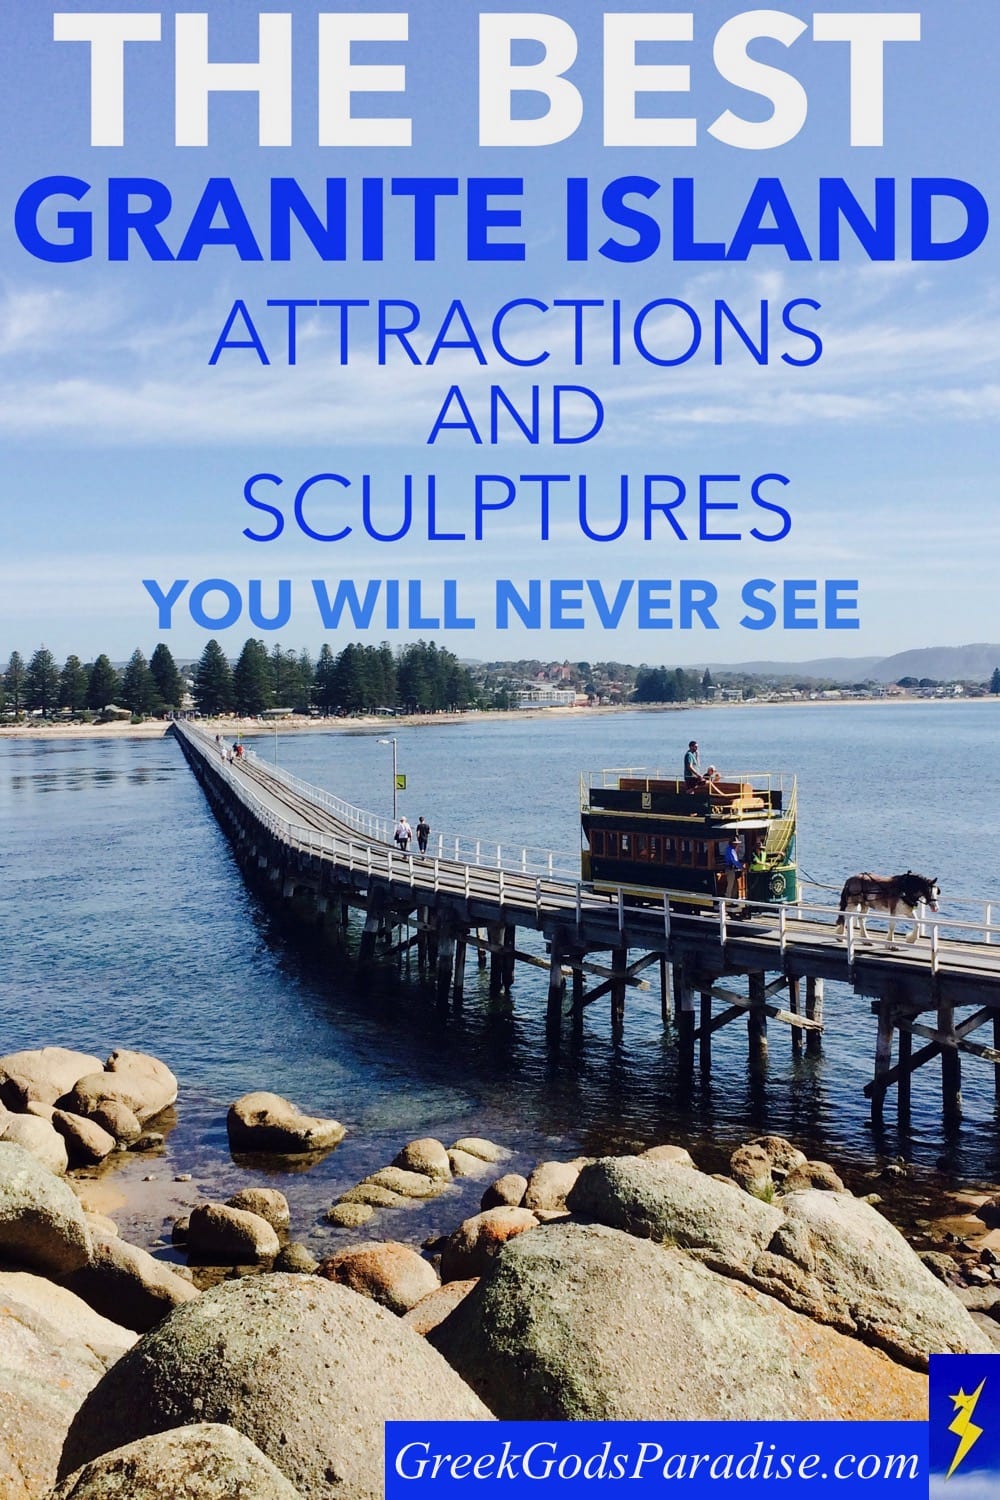 The Best Granite Island Attractions and Sculptures